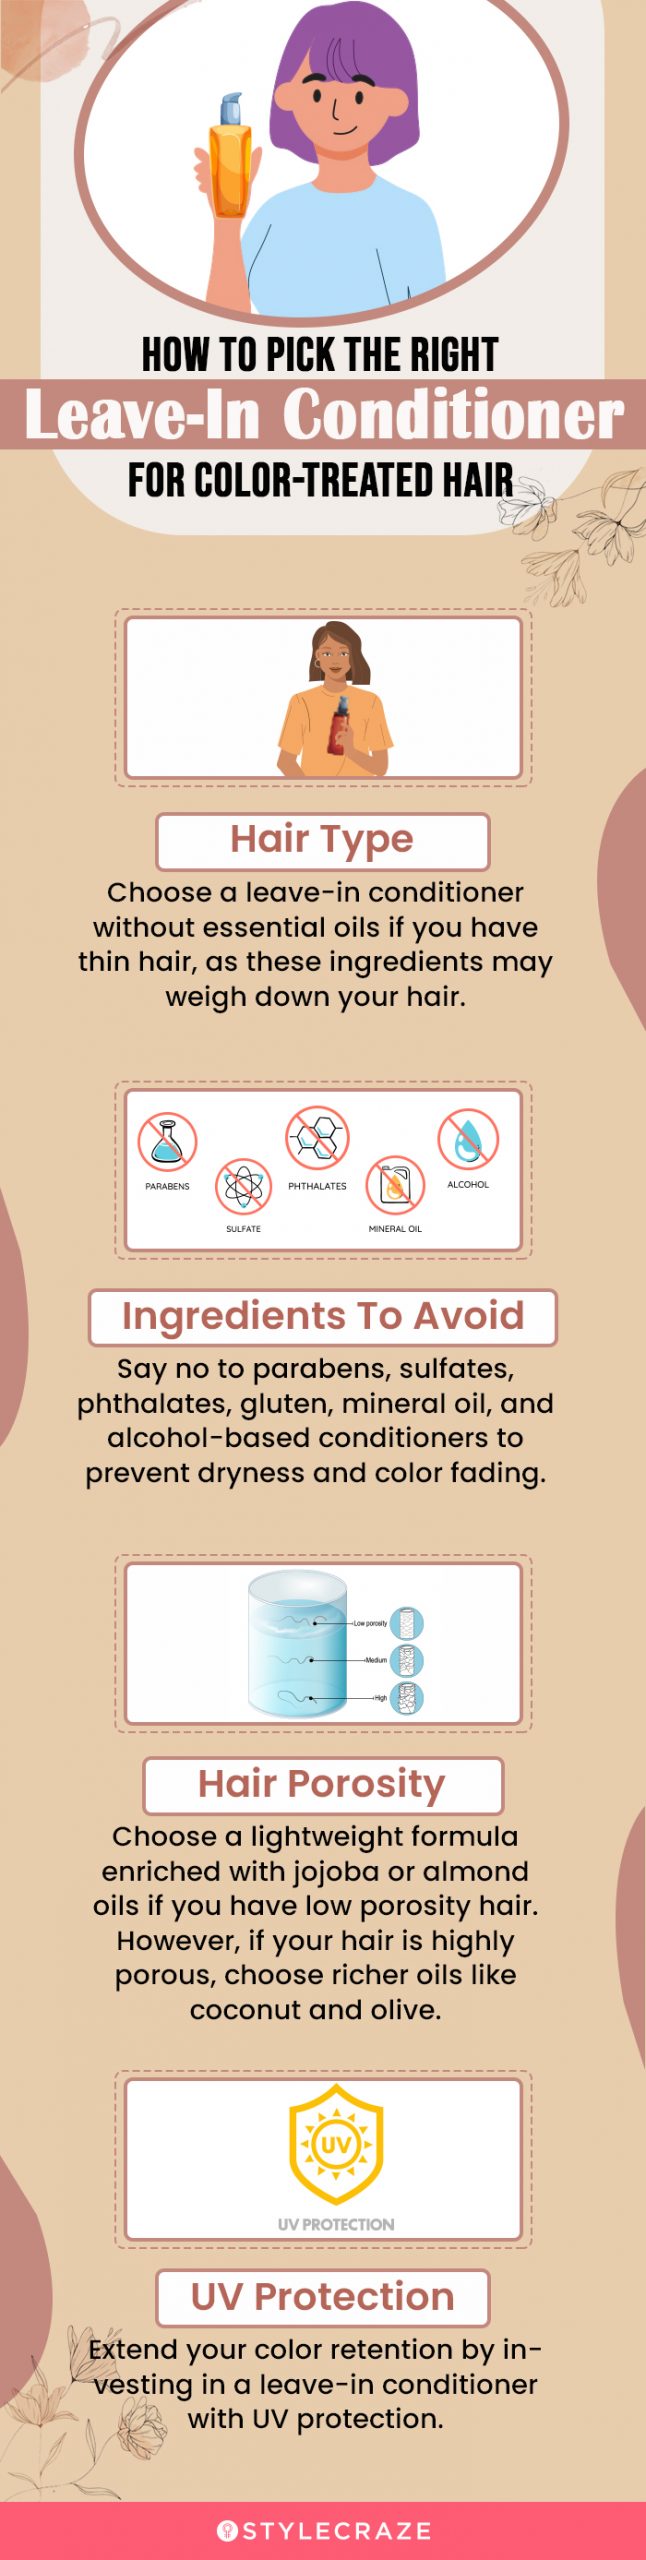 How To Pick The Right Leave-In Conditioner For Color-Treated Hair (infographic)